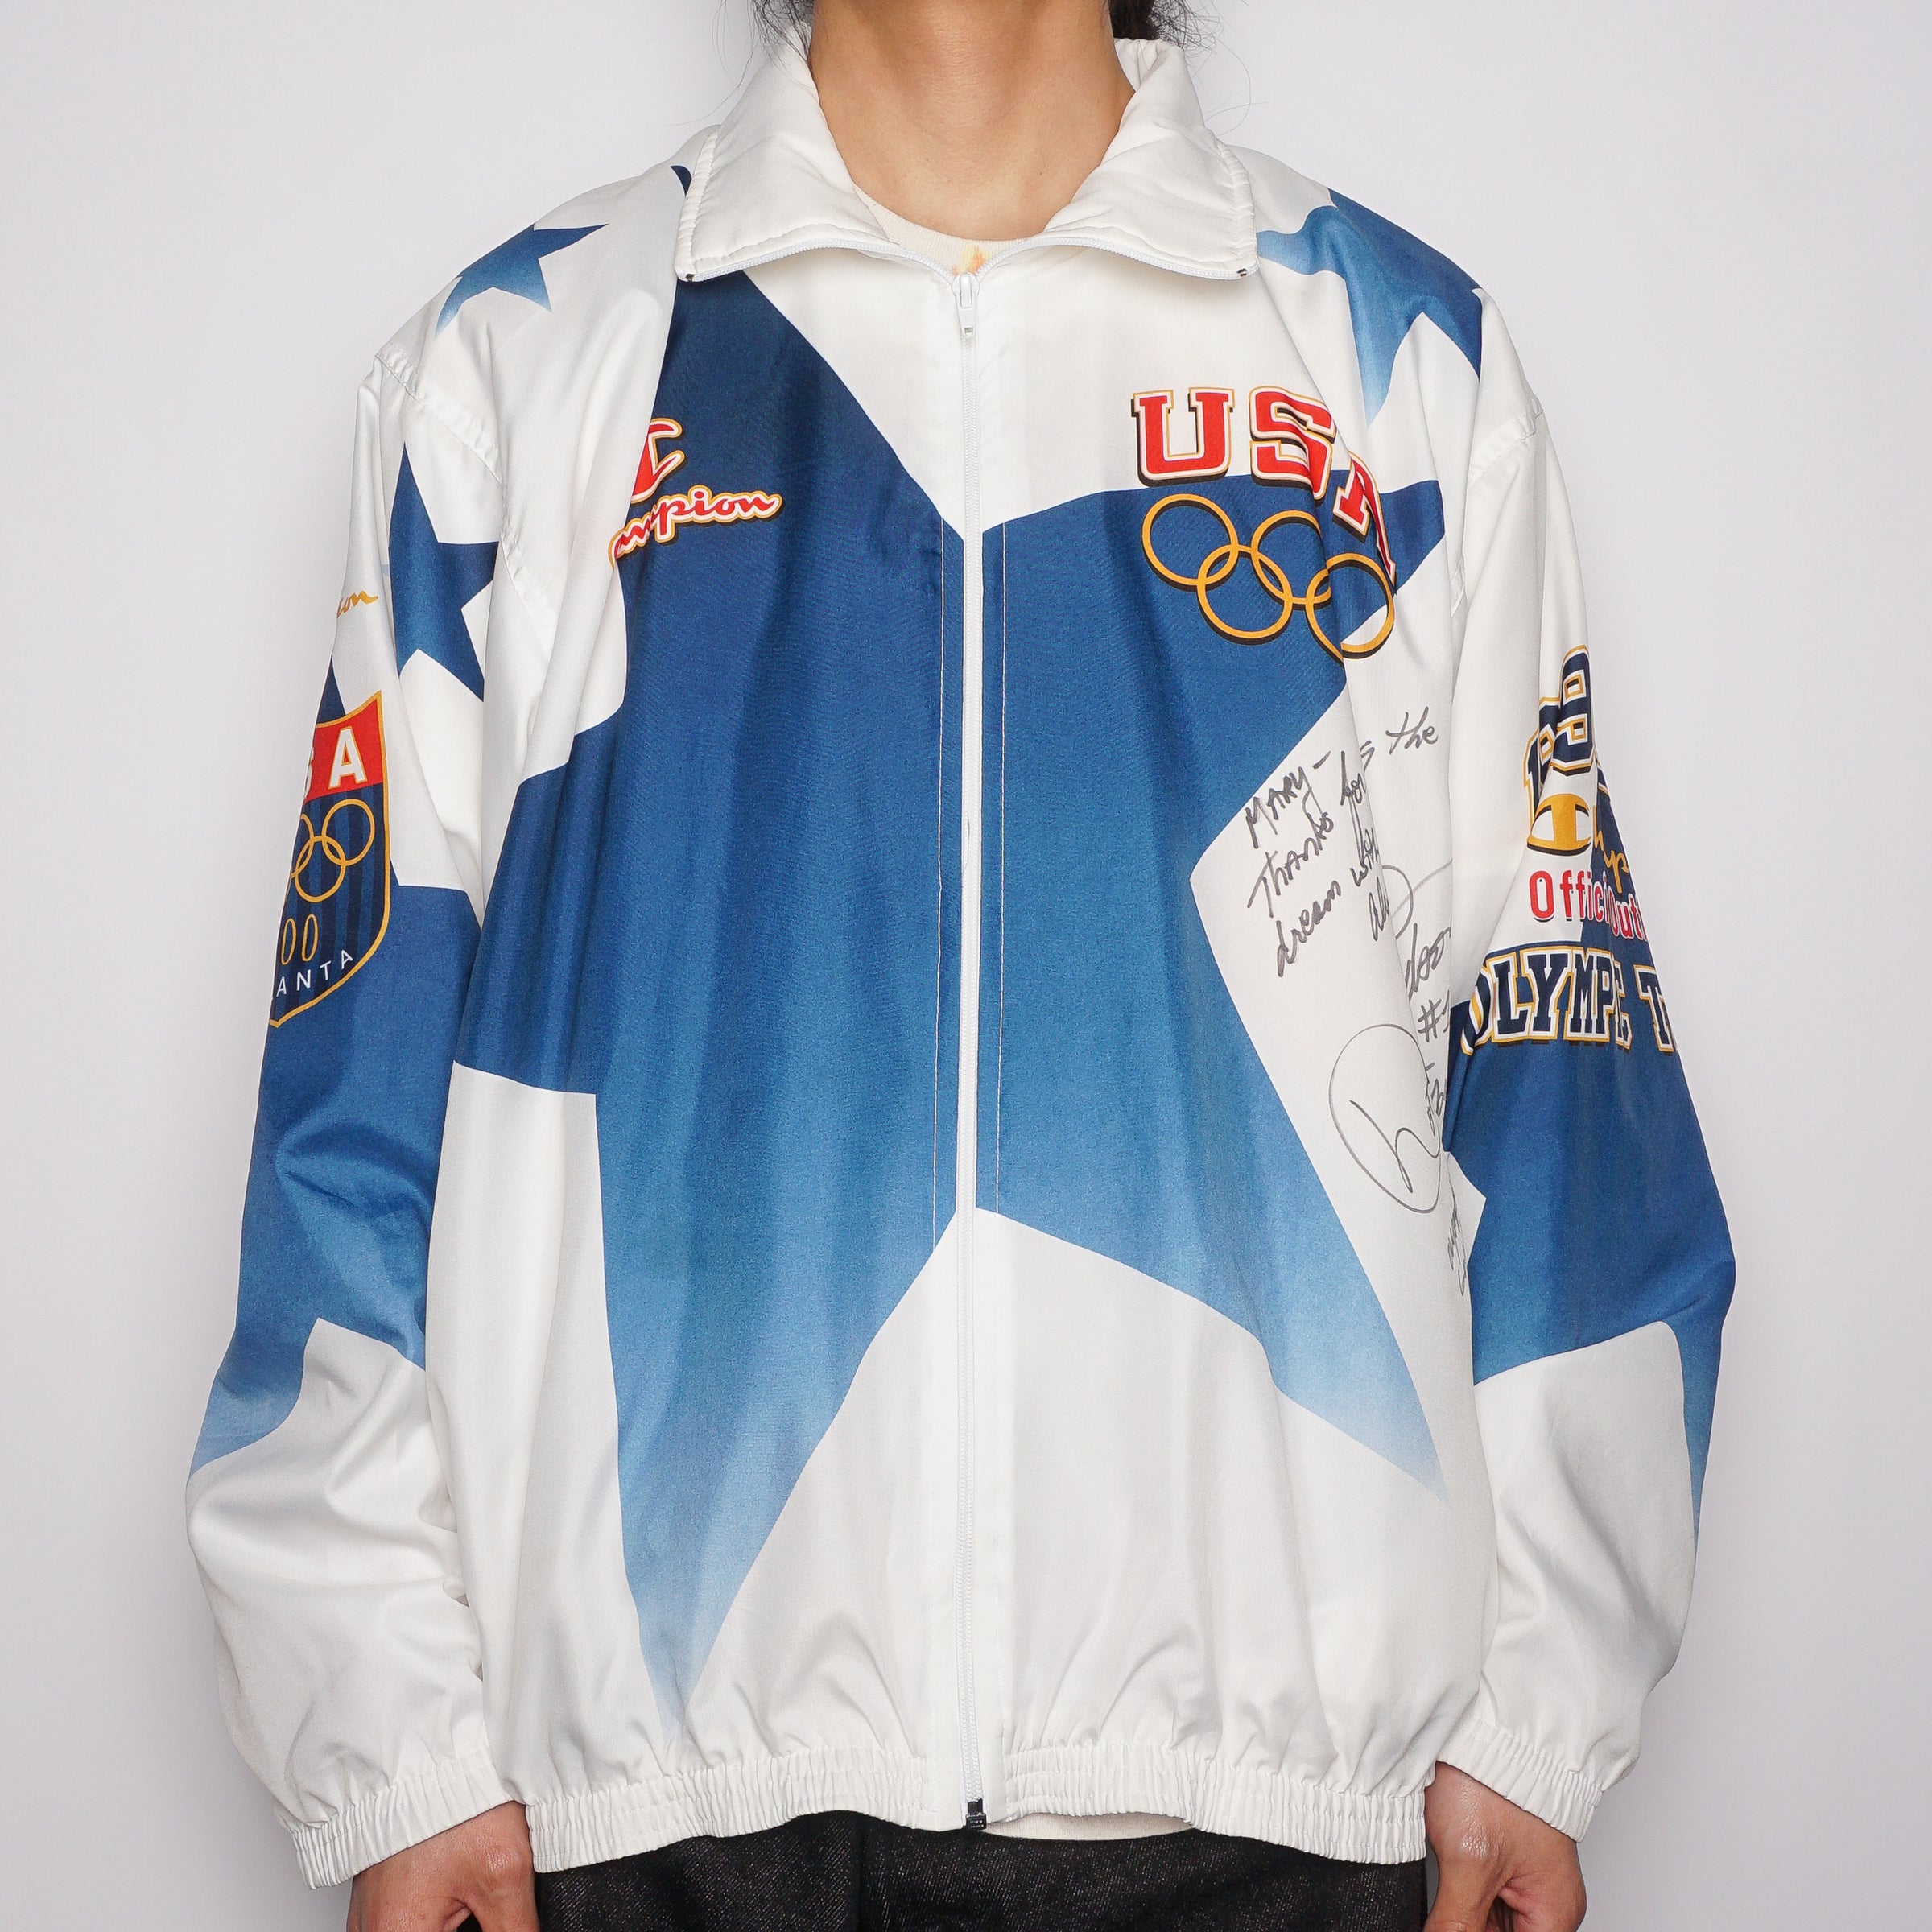 VTG CHAMPION USA OLYMPIC JACKET – TRIED AND TRUE